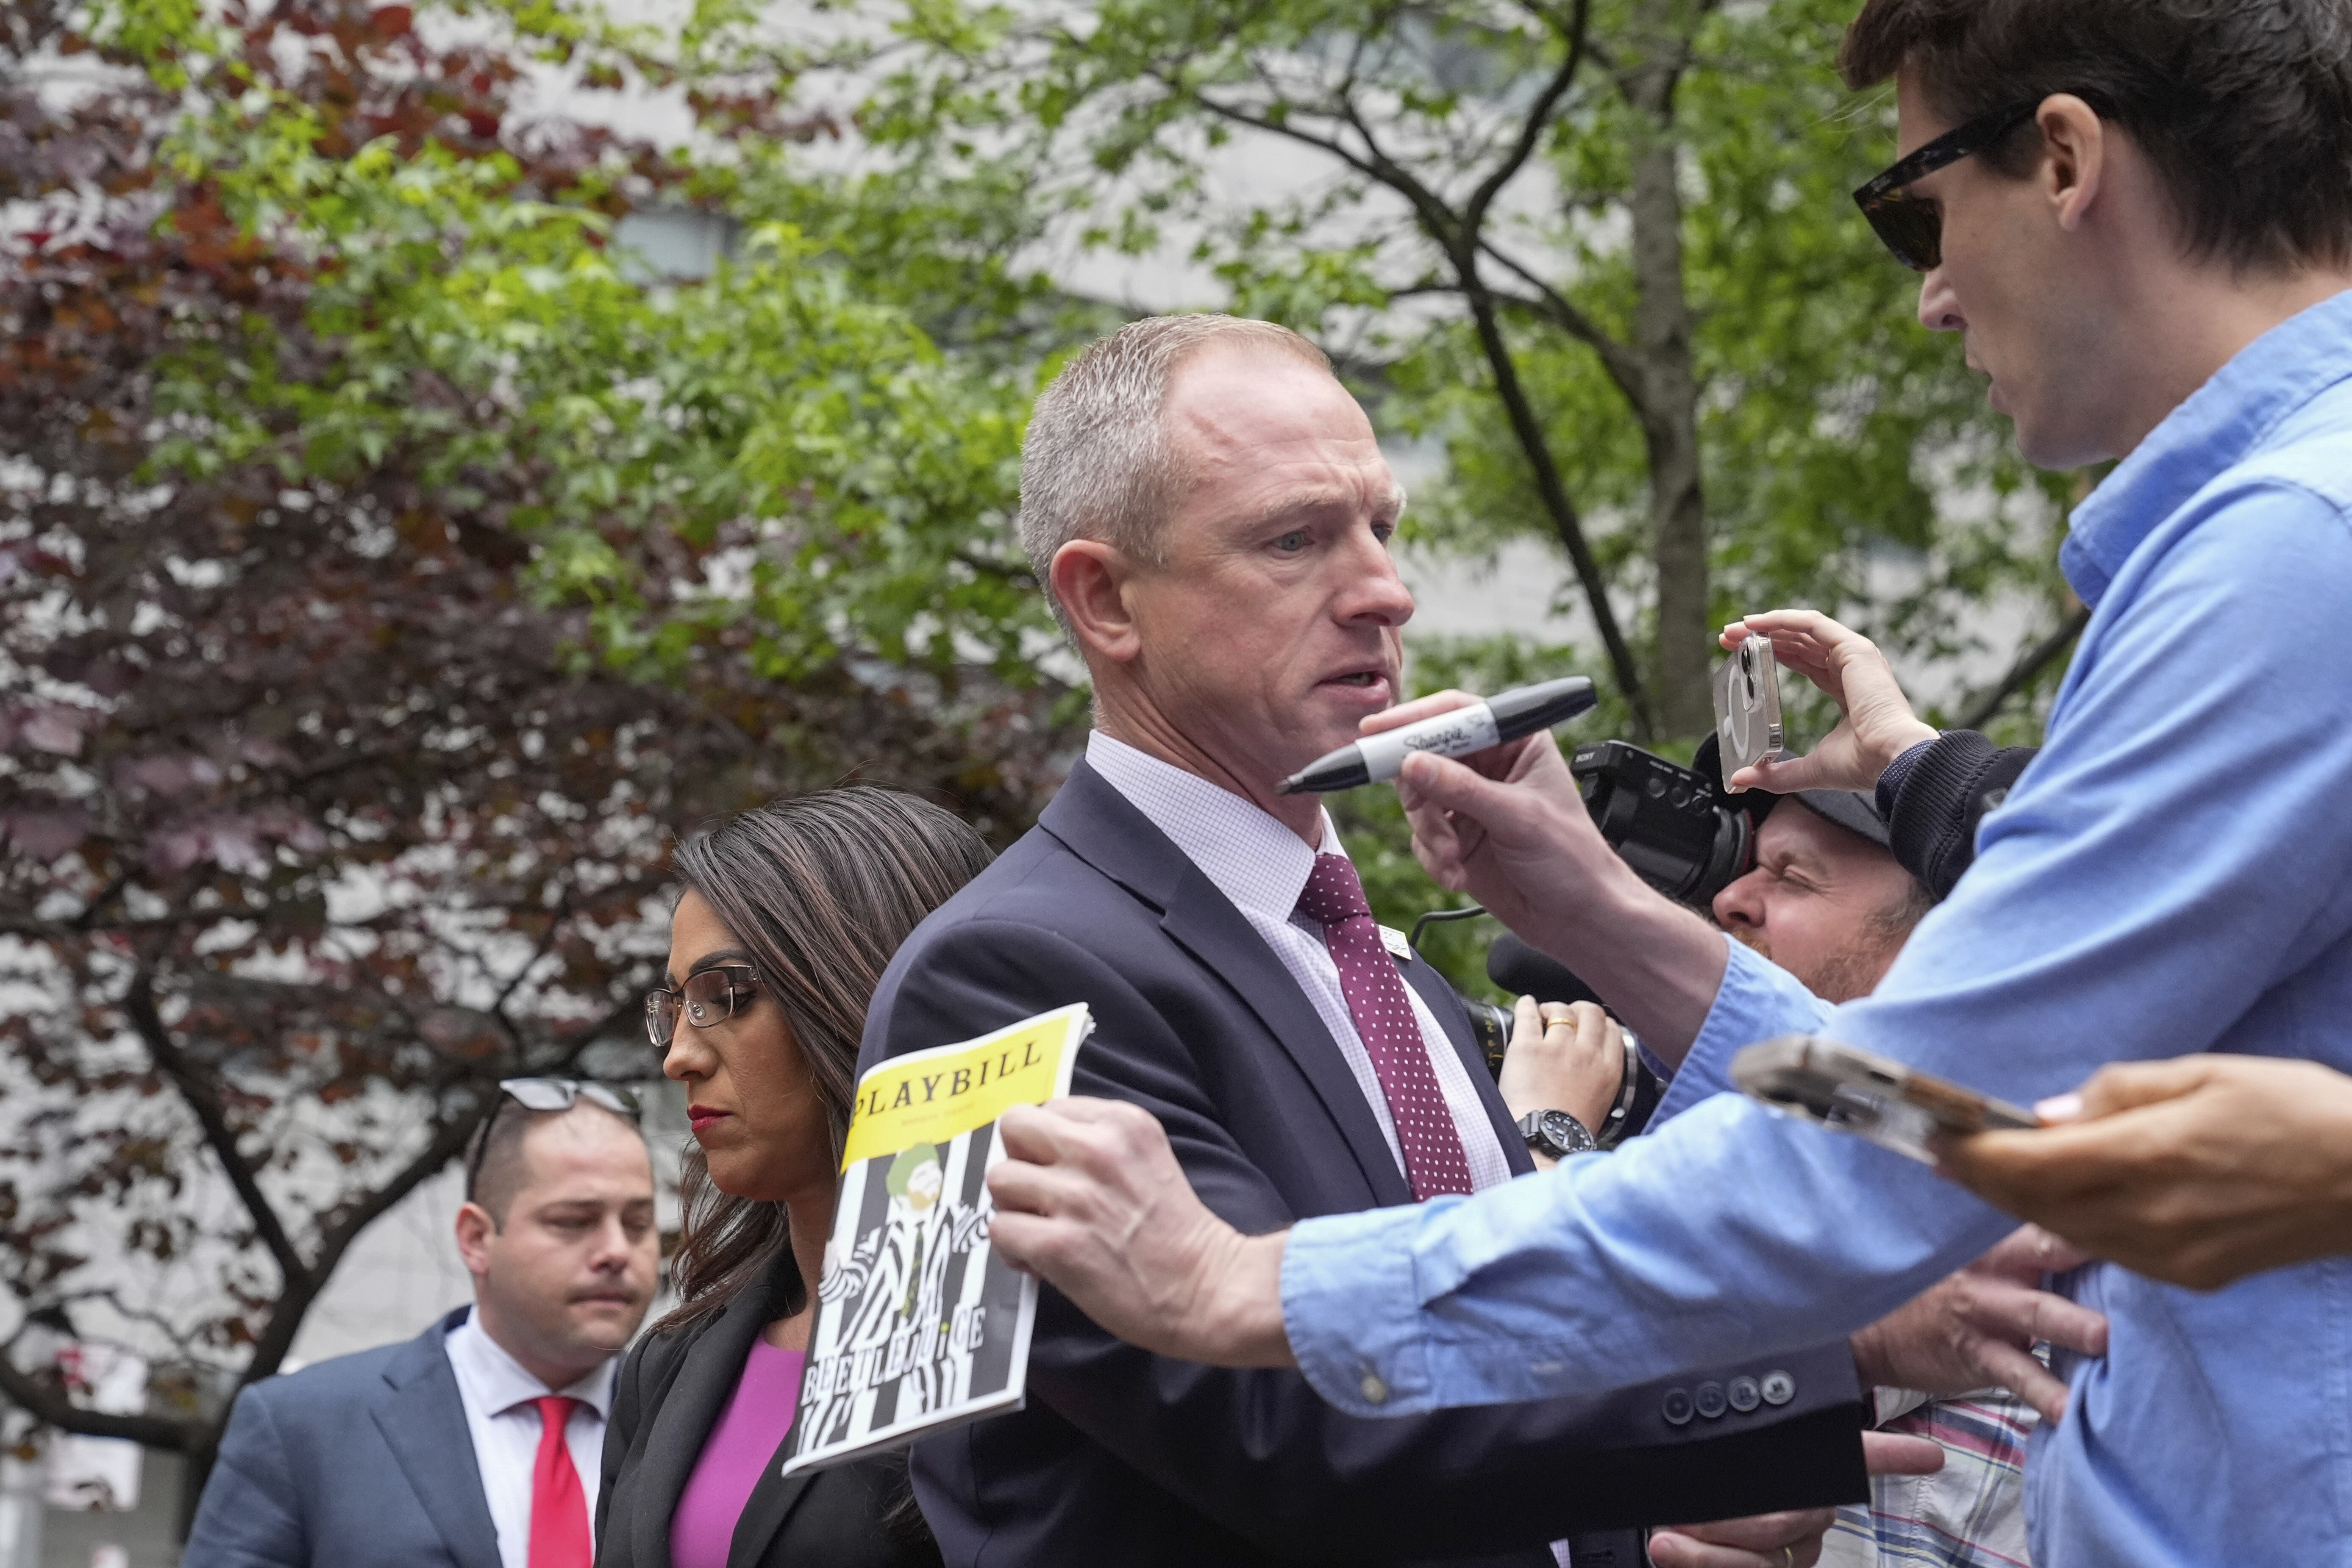 Security stops a person holding a "Beetlejuice" playbill and pen from approaching U.S. Rep. Lauren Boebert, R-Colo., during a news conference near Manhattan Criminal Court outside Donald Trump's hush-money trial on May 16, 2024, in New York. (AP Photo/Frank Franklin II)